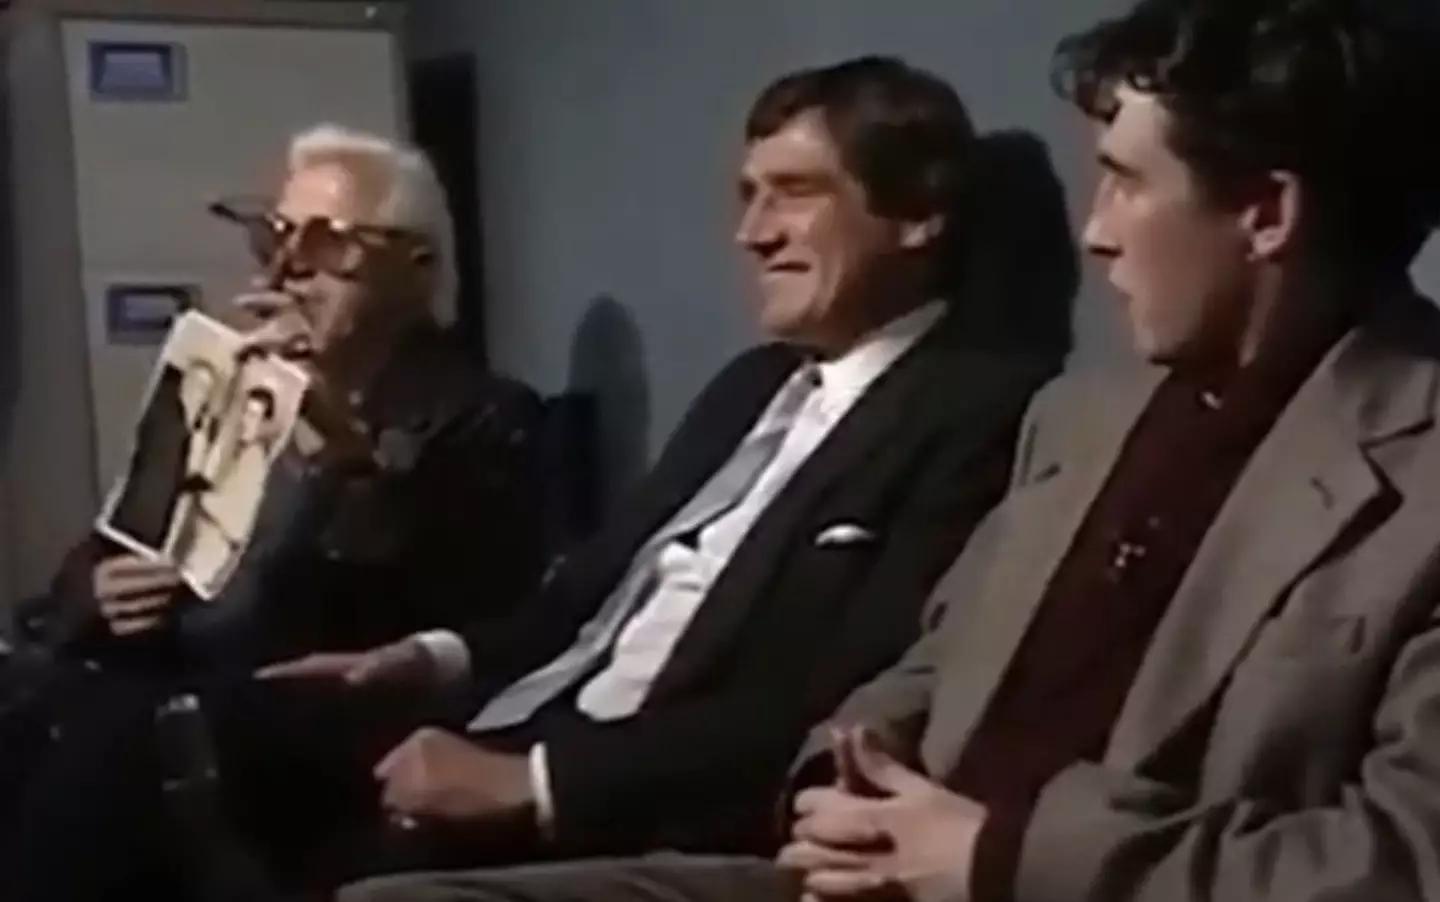 Savile was also in the interview and witnessed Coogan's impression of him.